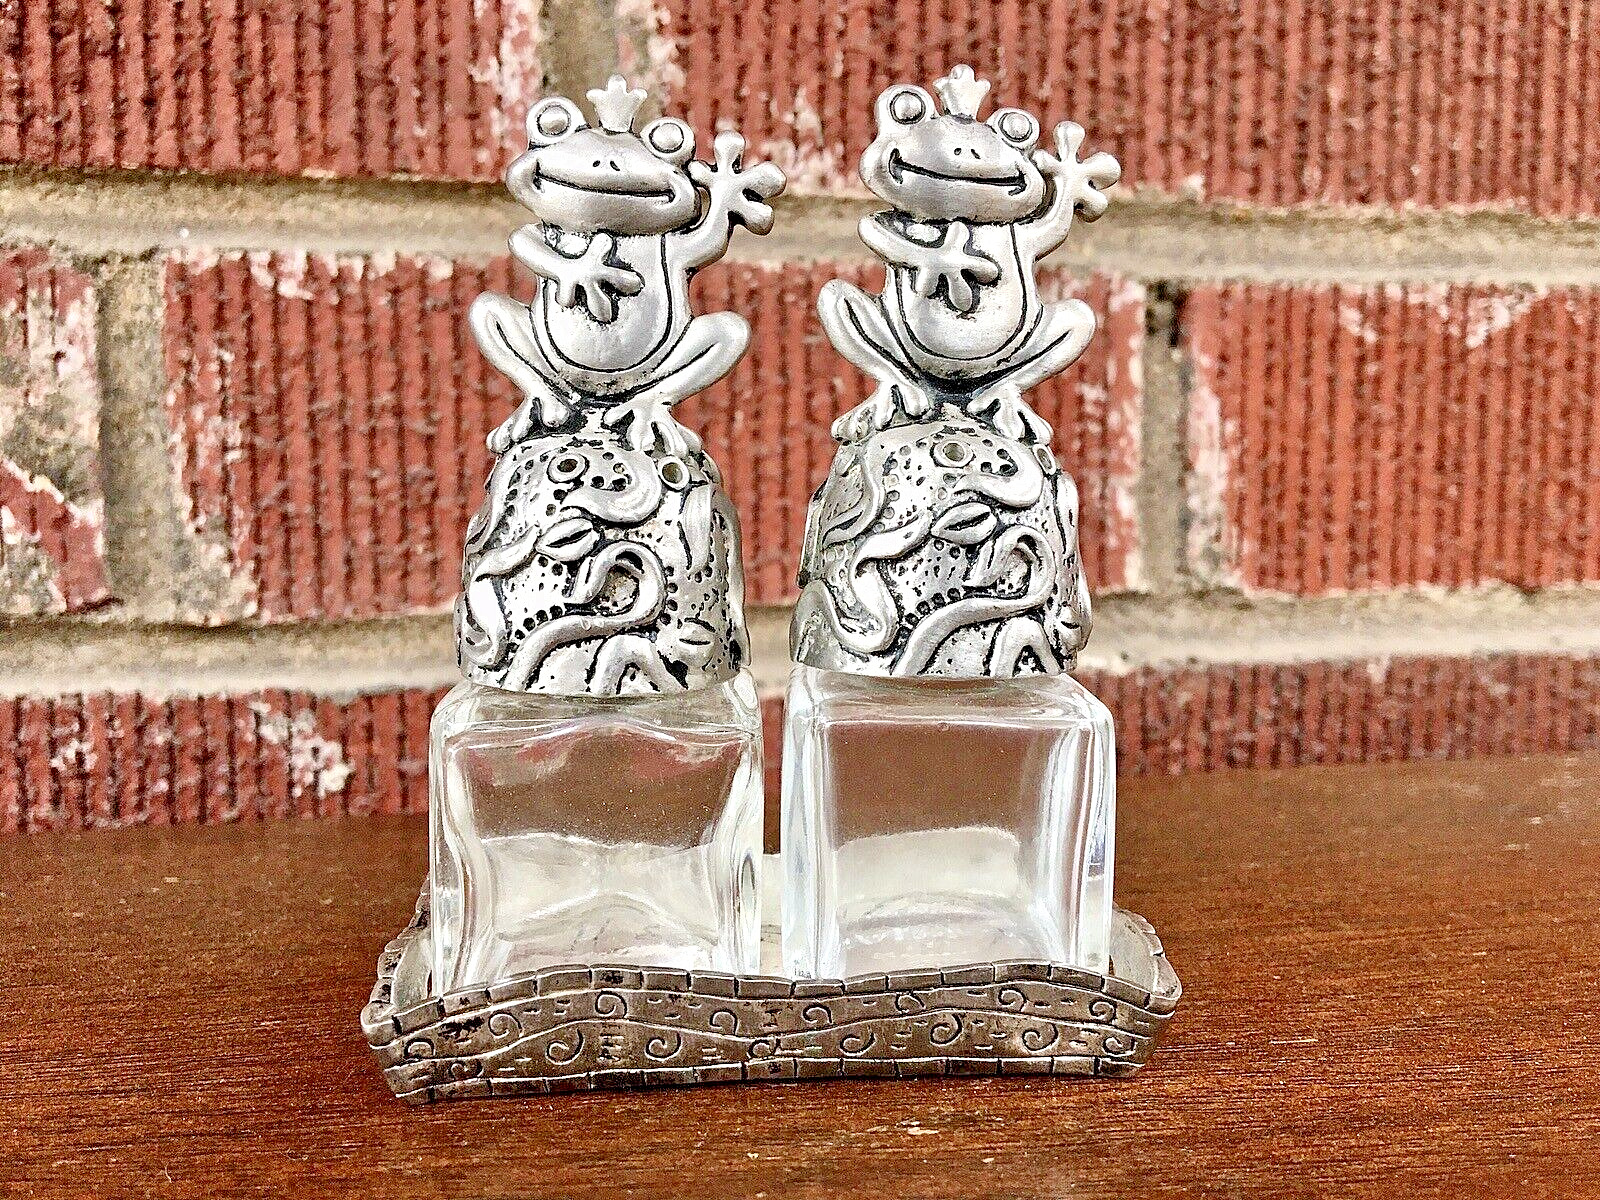 Vintage Pewter & Glass HAPPY FROGS ON LILY PADS Salt & Pepper Shakers w/ Tray